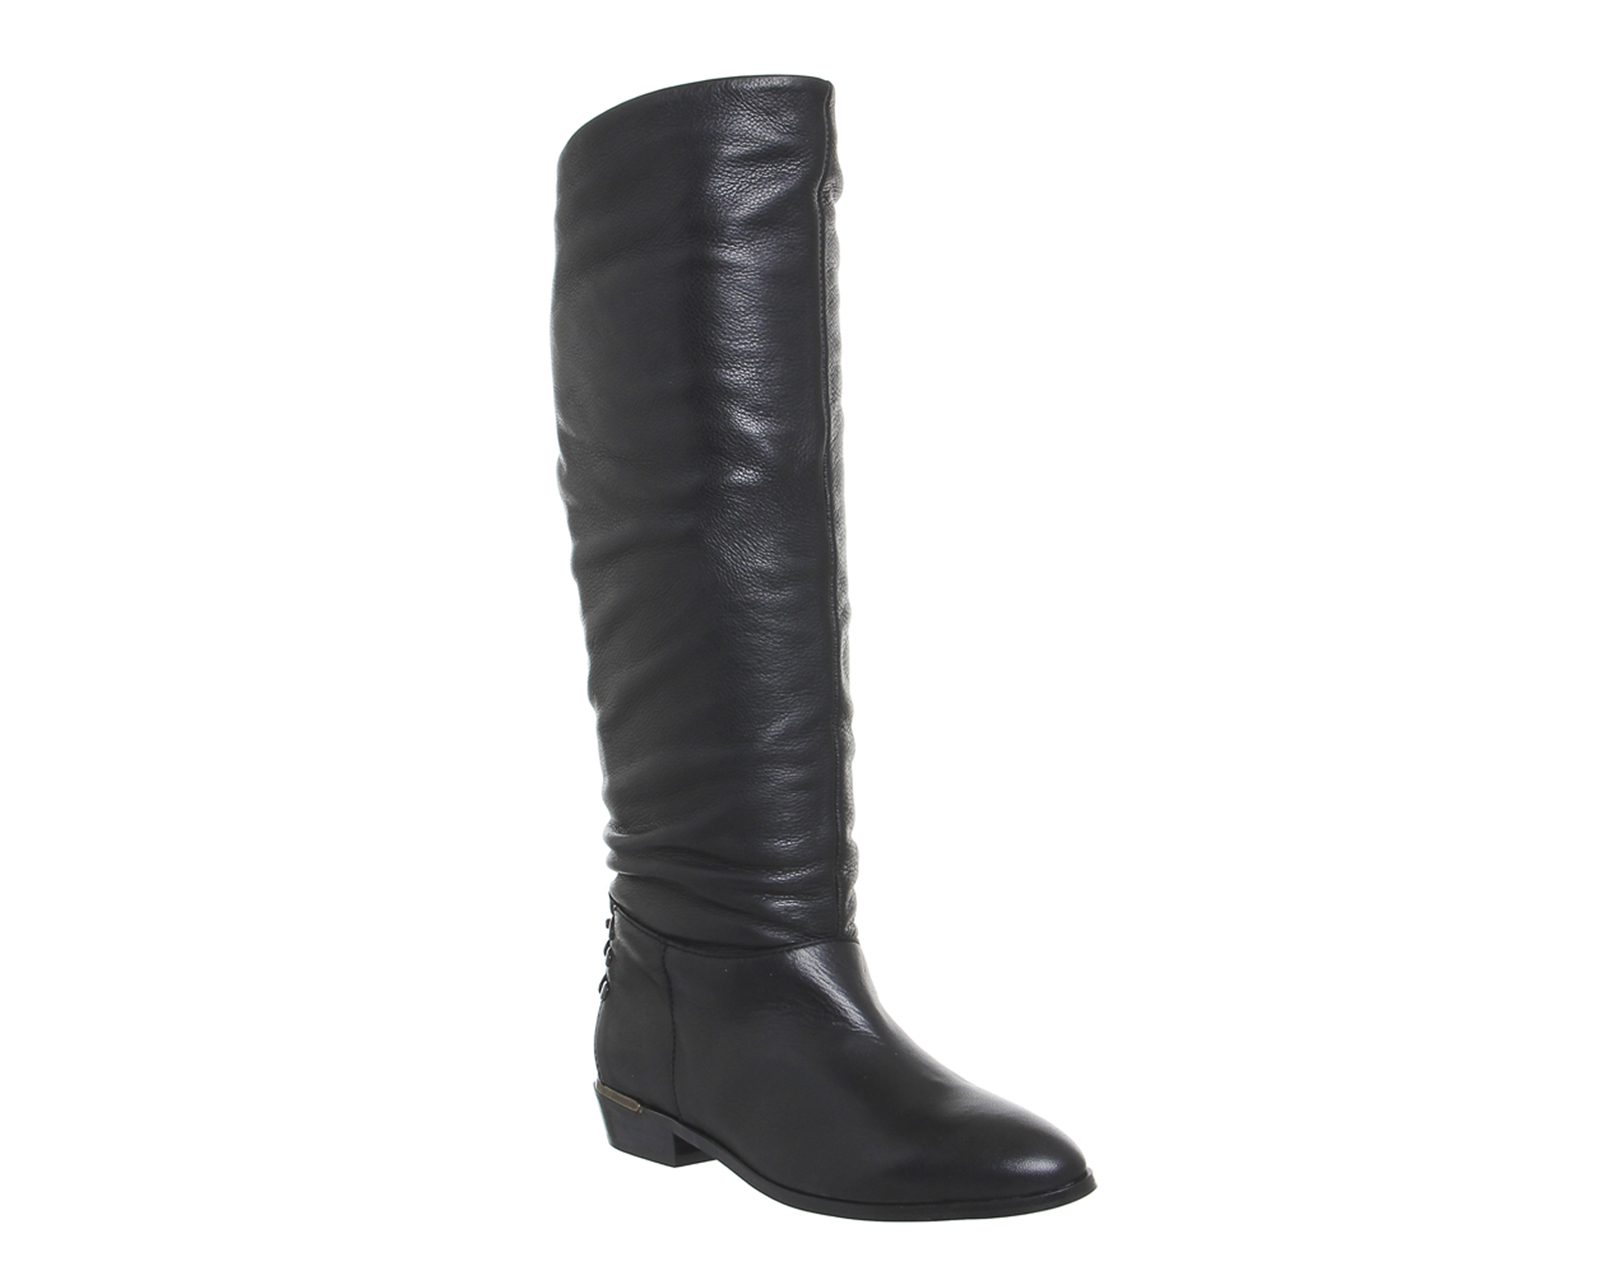 OFFICEKyle Slouch Knee BootsBlack Leather